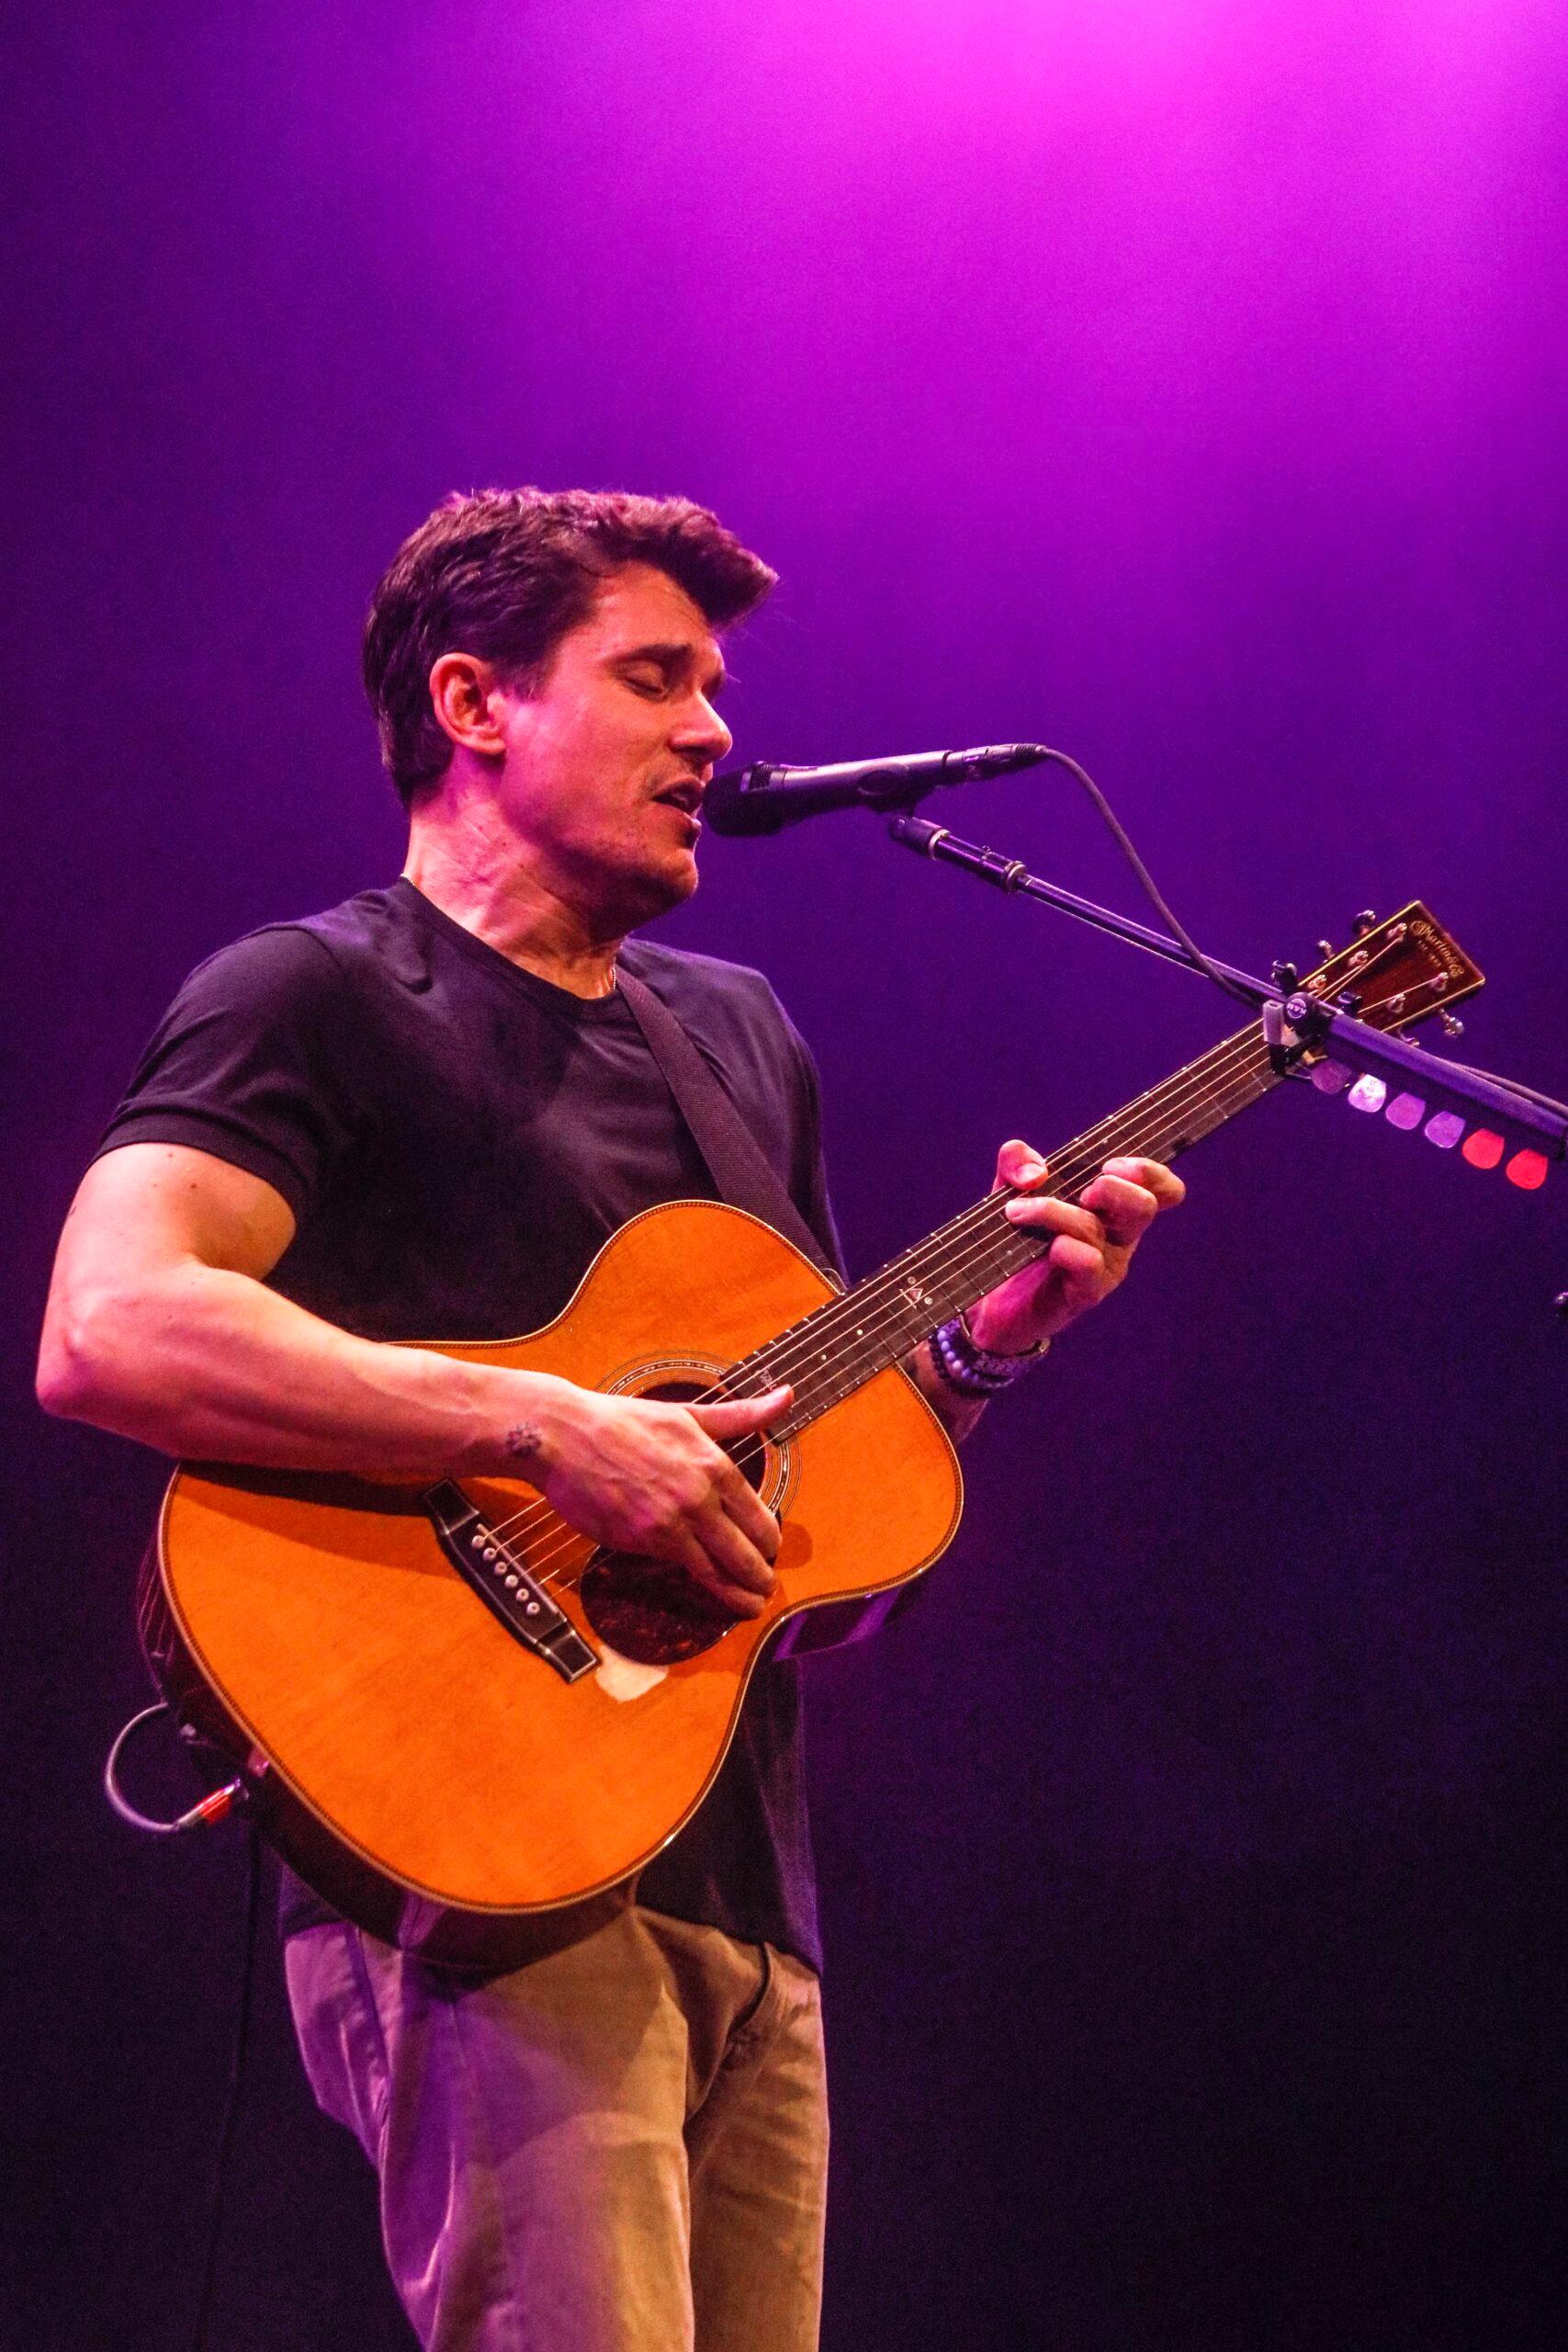 John Mayer performing during his acoustic tour